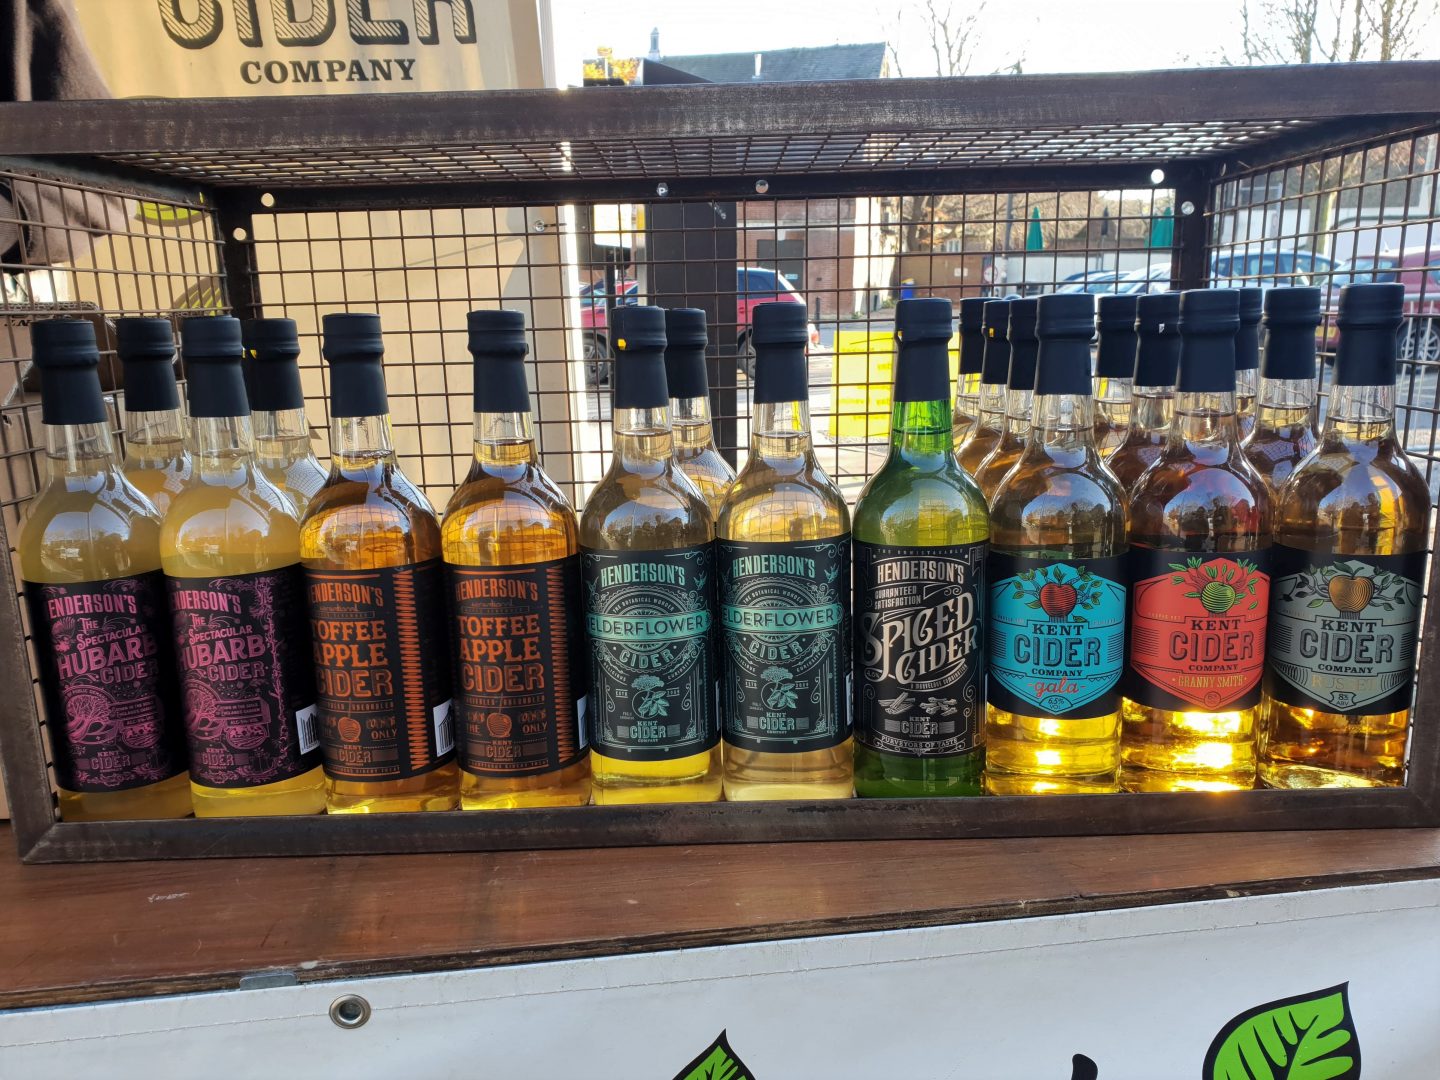 Kent Cider Company flavours